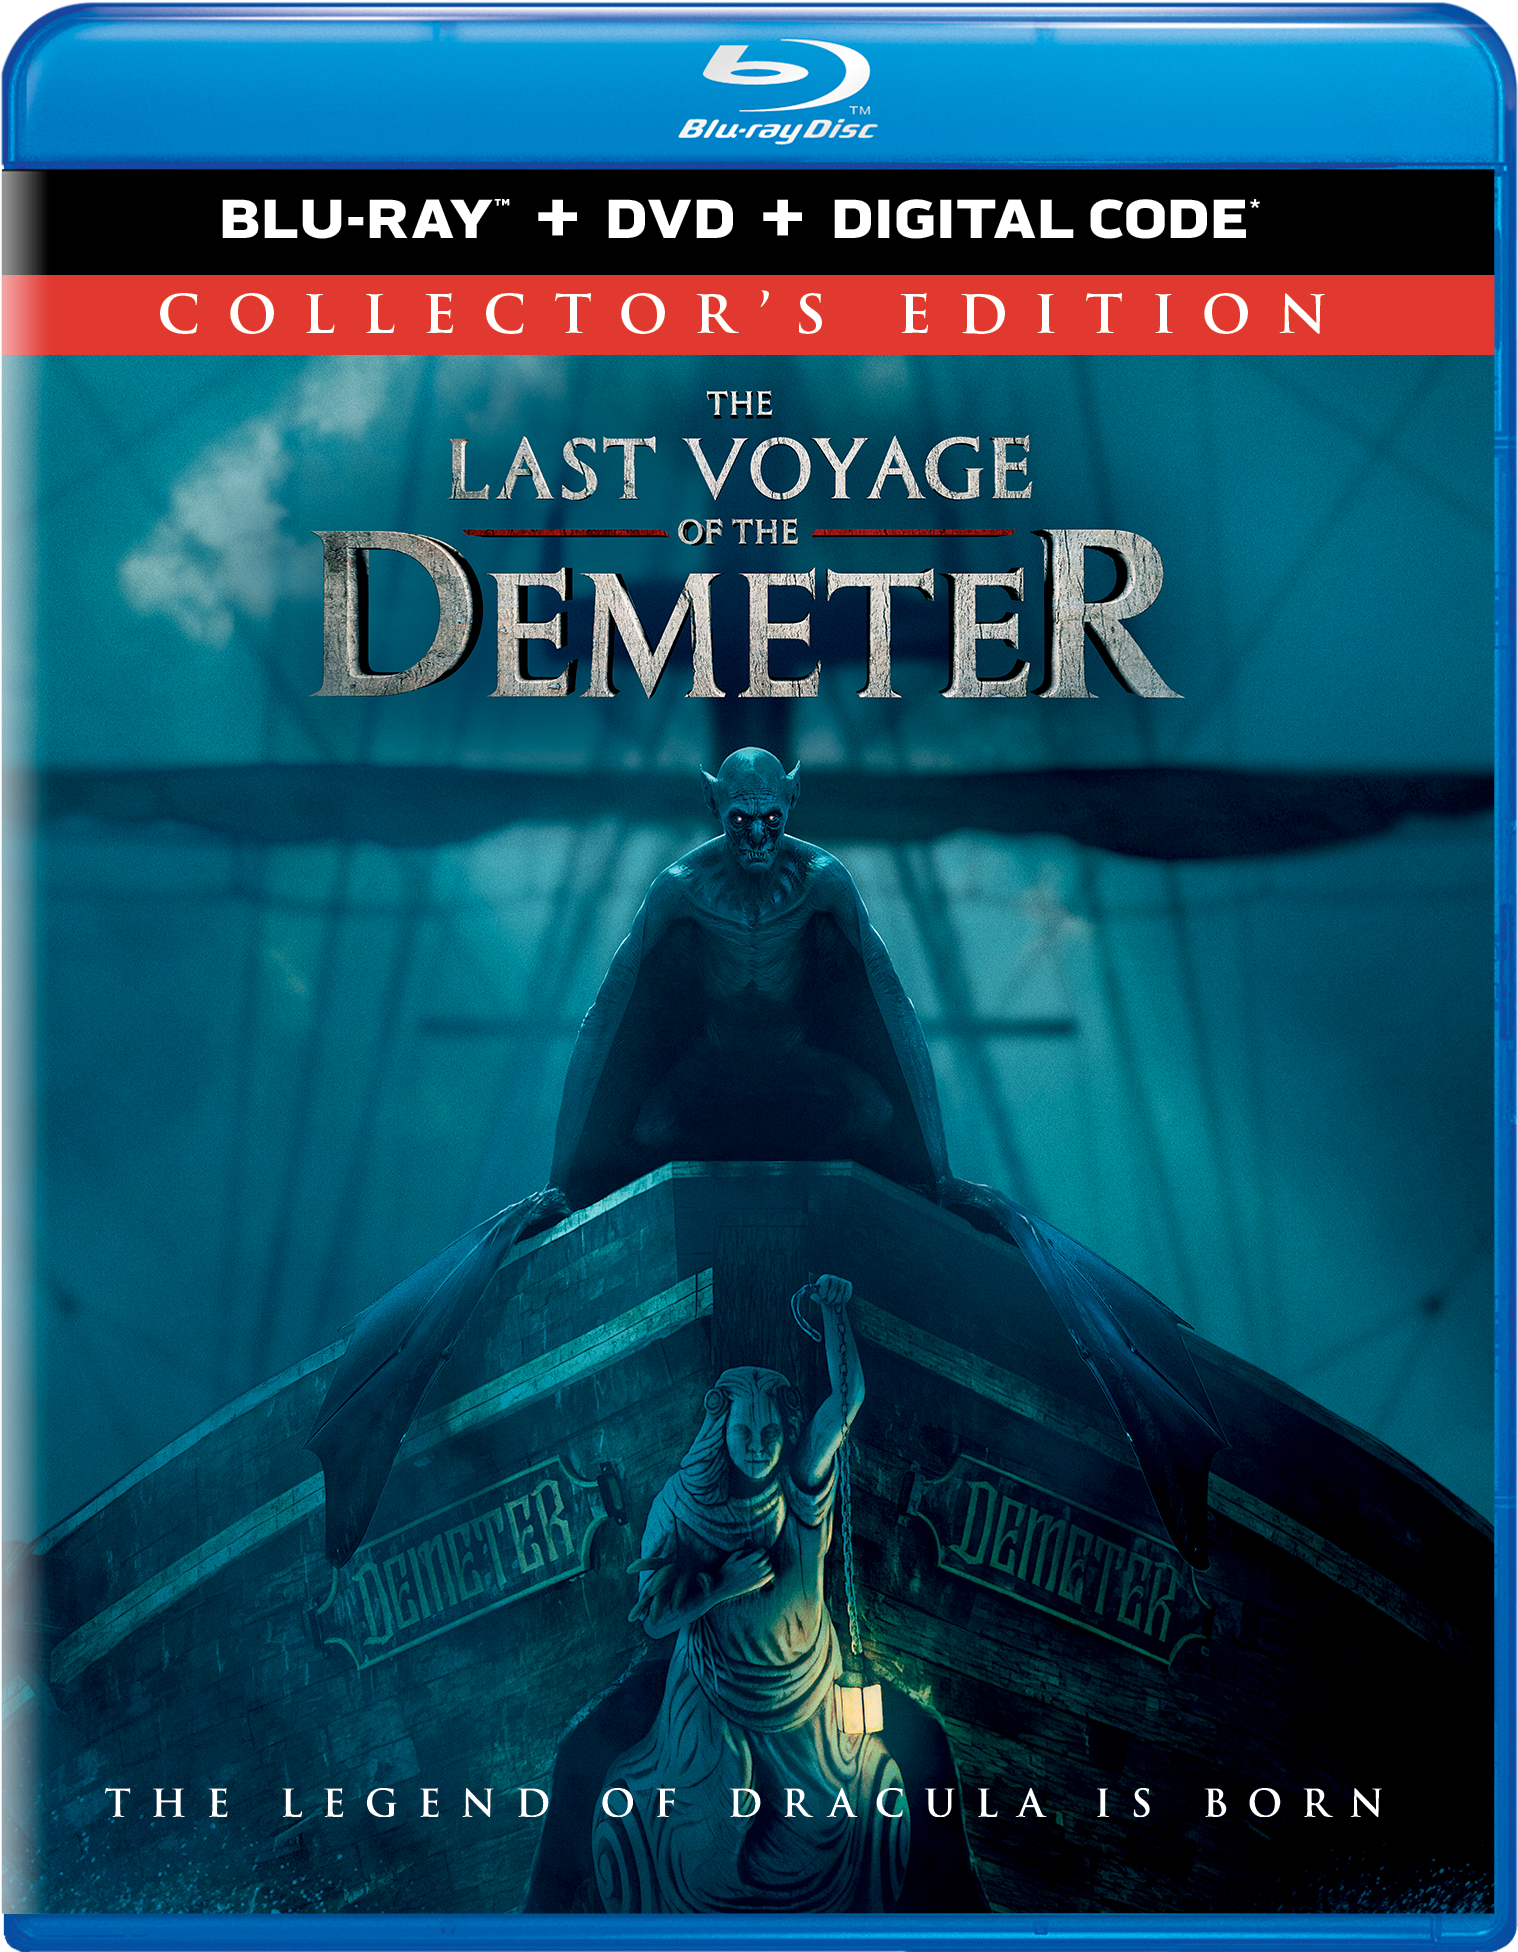 Why The Last Voyage of the Demeter Will Make Dracula Scary Again